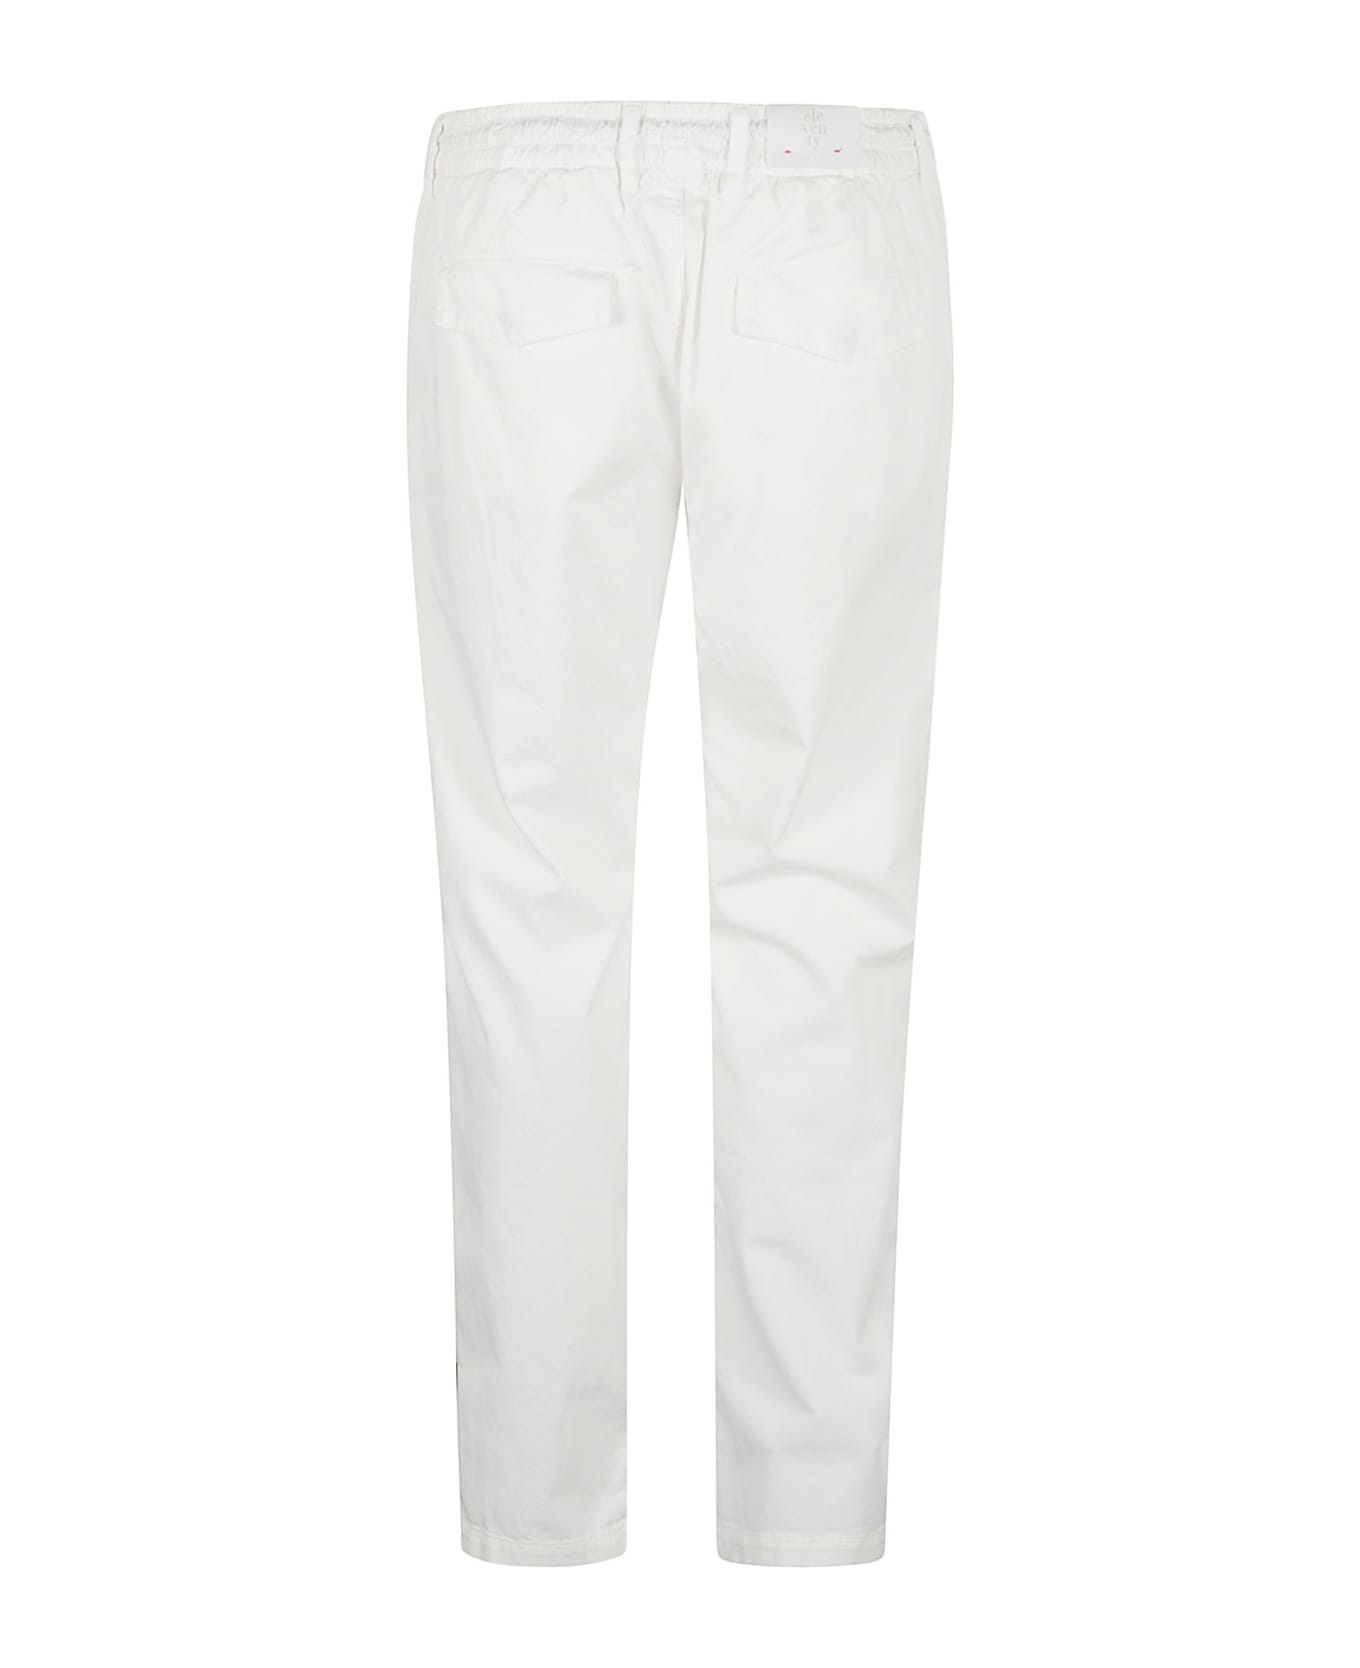 Eleventy Drawstringed Buttoned Trousers - White